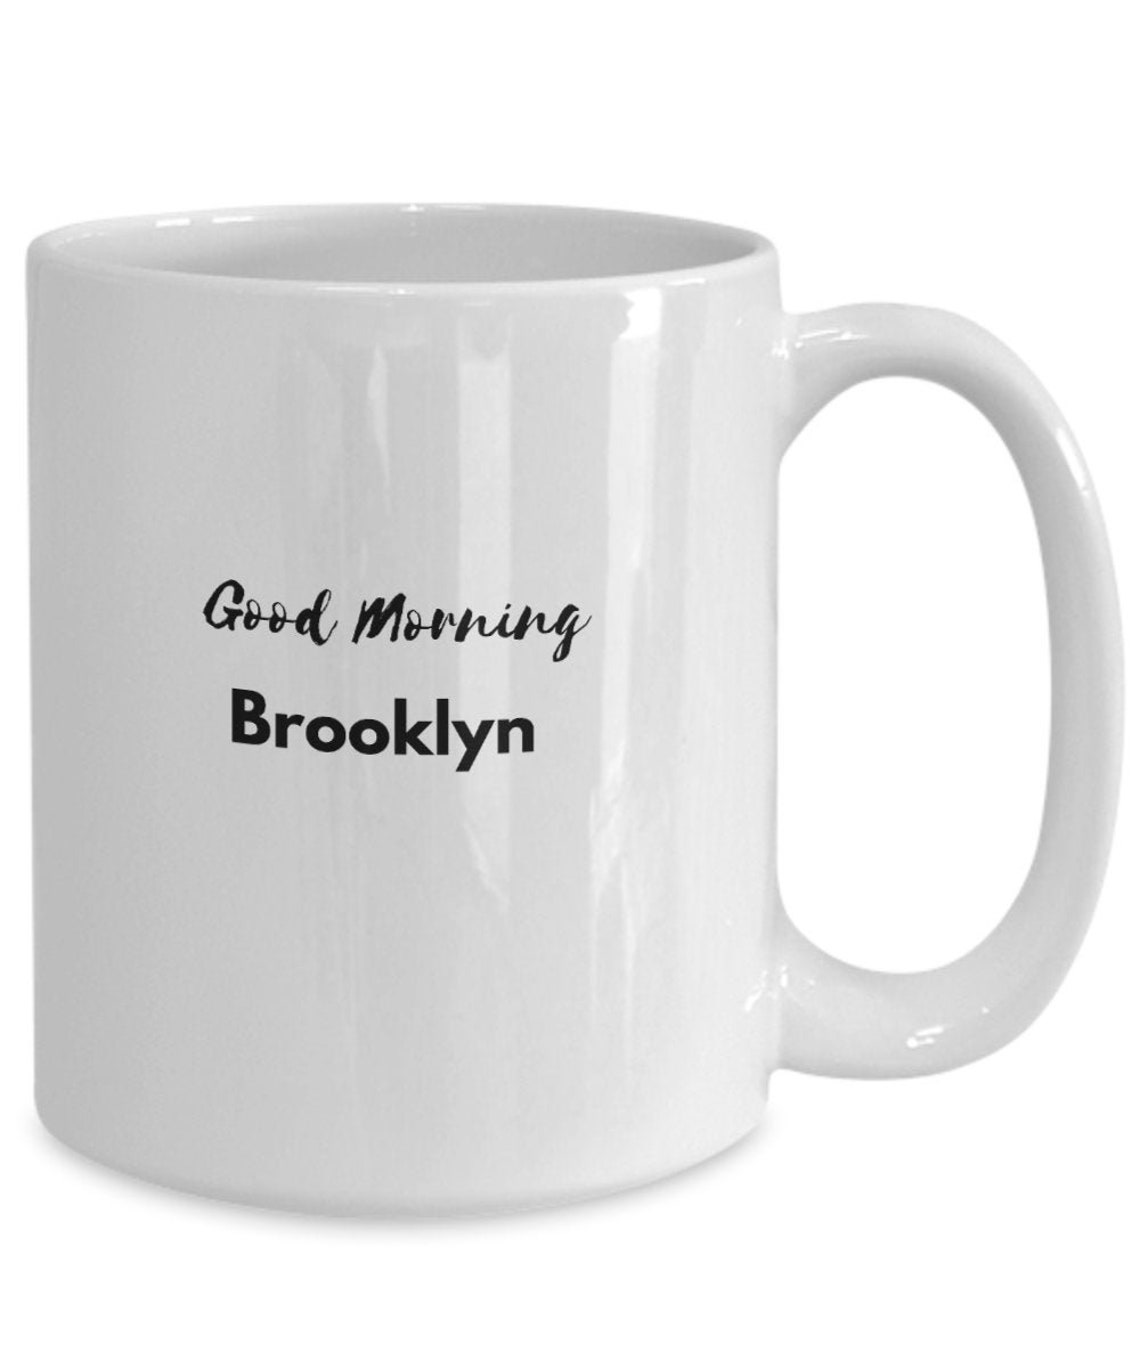 Brooklyn Coffee Mug Funny Coffee Cup Gift for New Yorkers